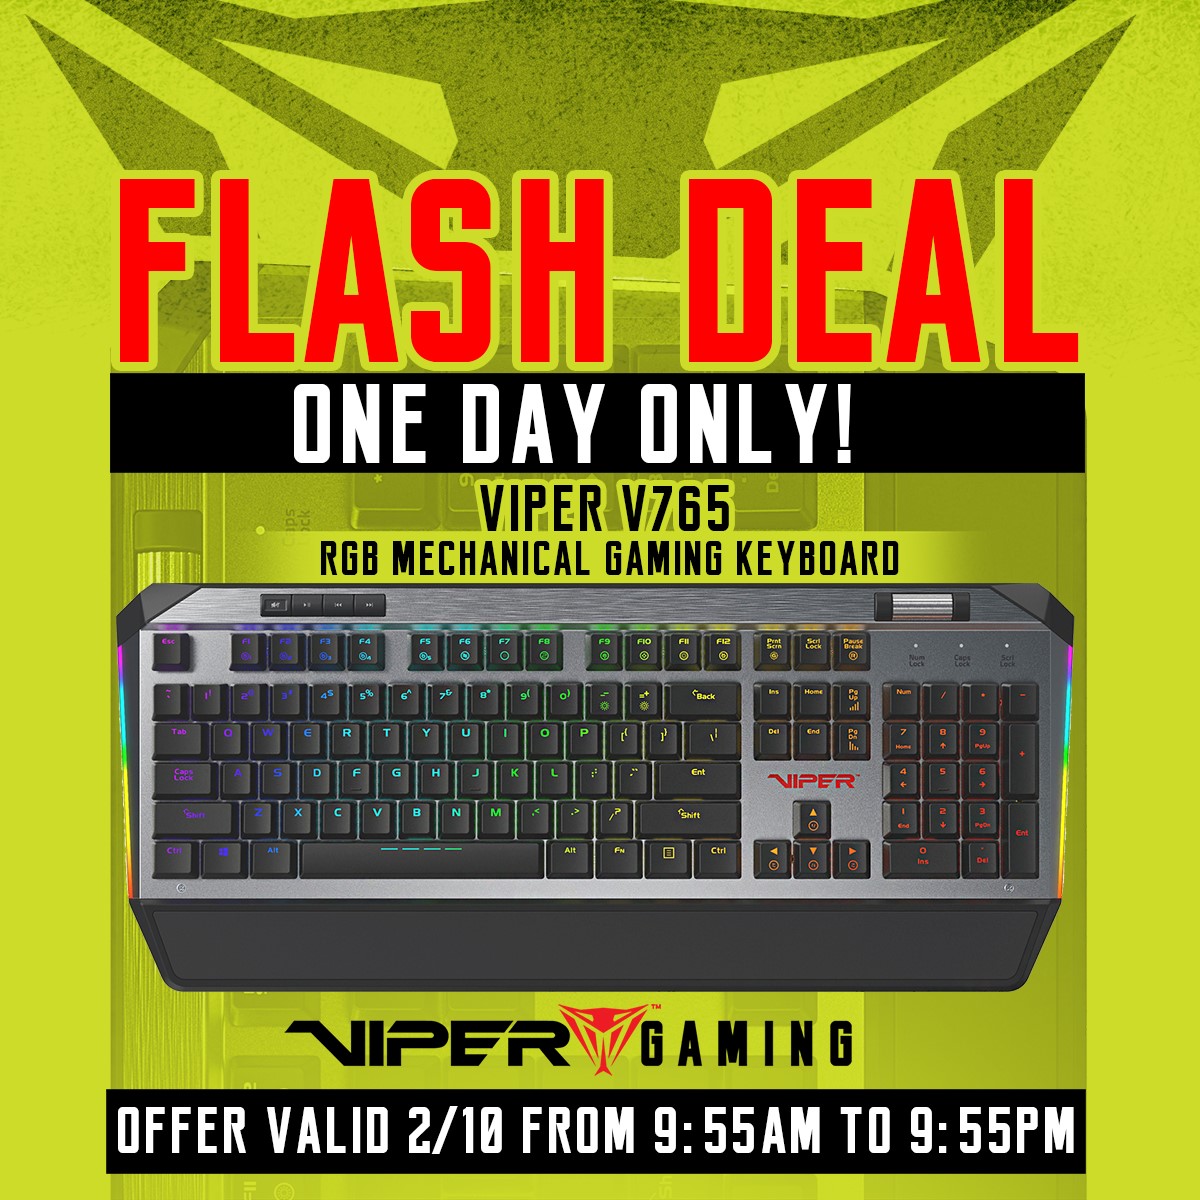 ONE DAY ONLY! Sending you a special deal to cheer for 2022! Visit Amazon to get the Viper V765 RGB Keyboard for a steal of $55.24 before offer ends on TONIGHT (2/10/22) at 9:55pm. Check it out here in the link in our bio!